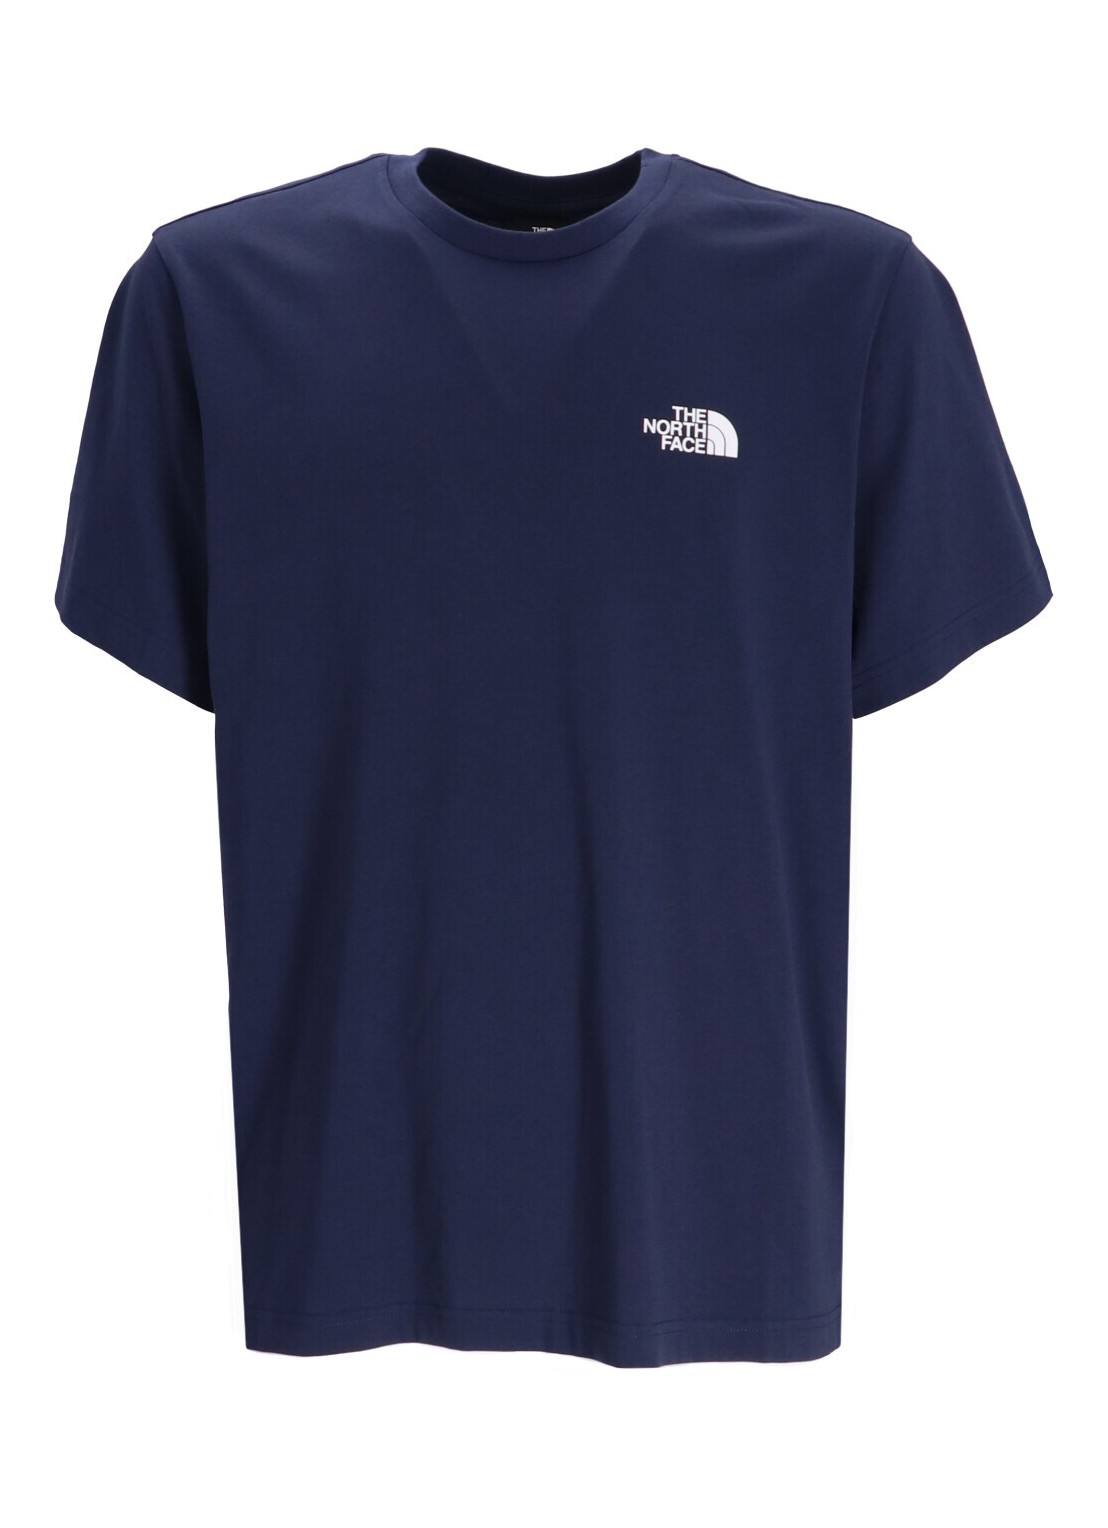 Camiseta the north face t-shirt man m s/s simple dome tee nf0a87ng8k21 8k21 talla L
 